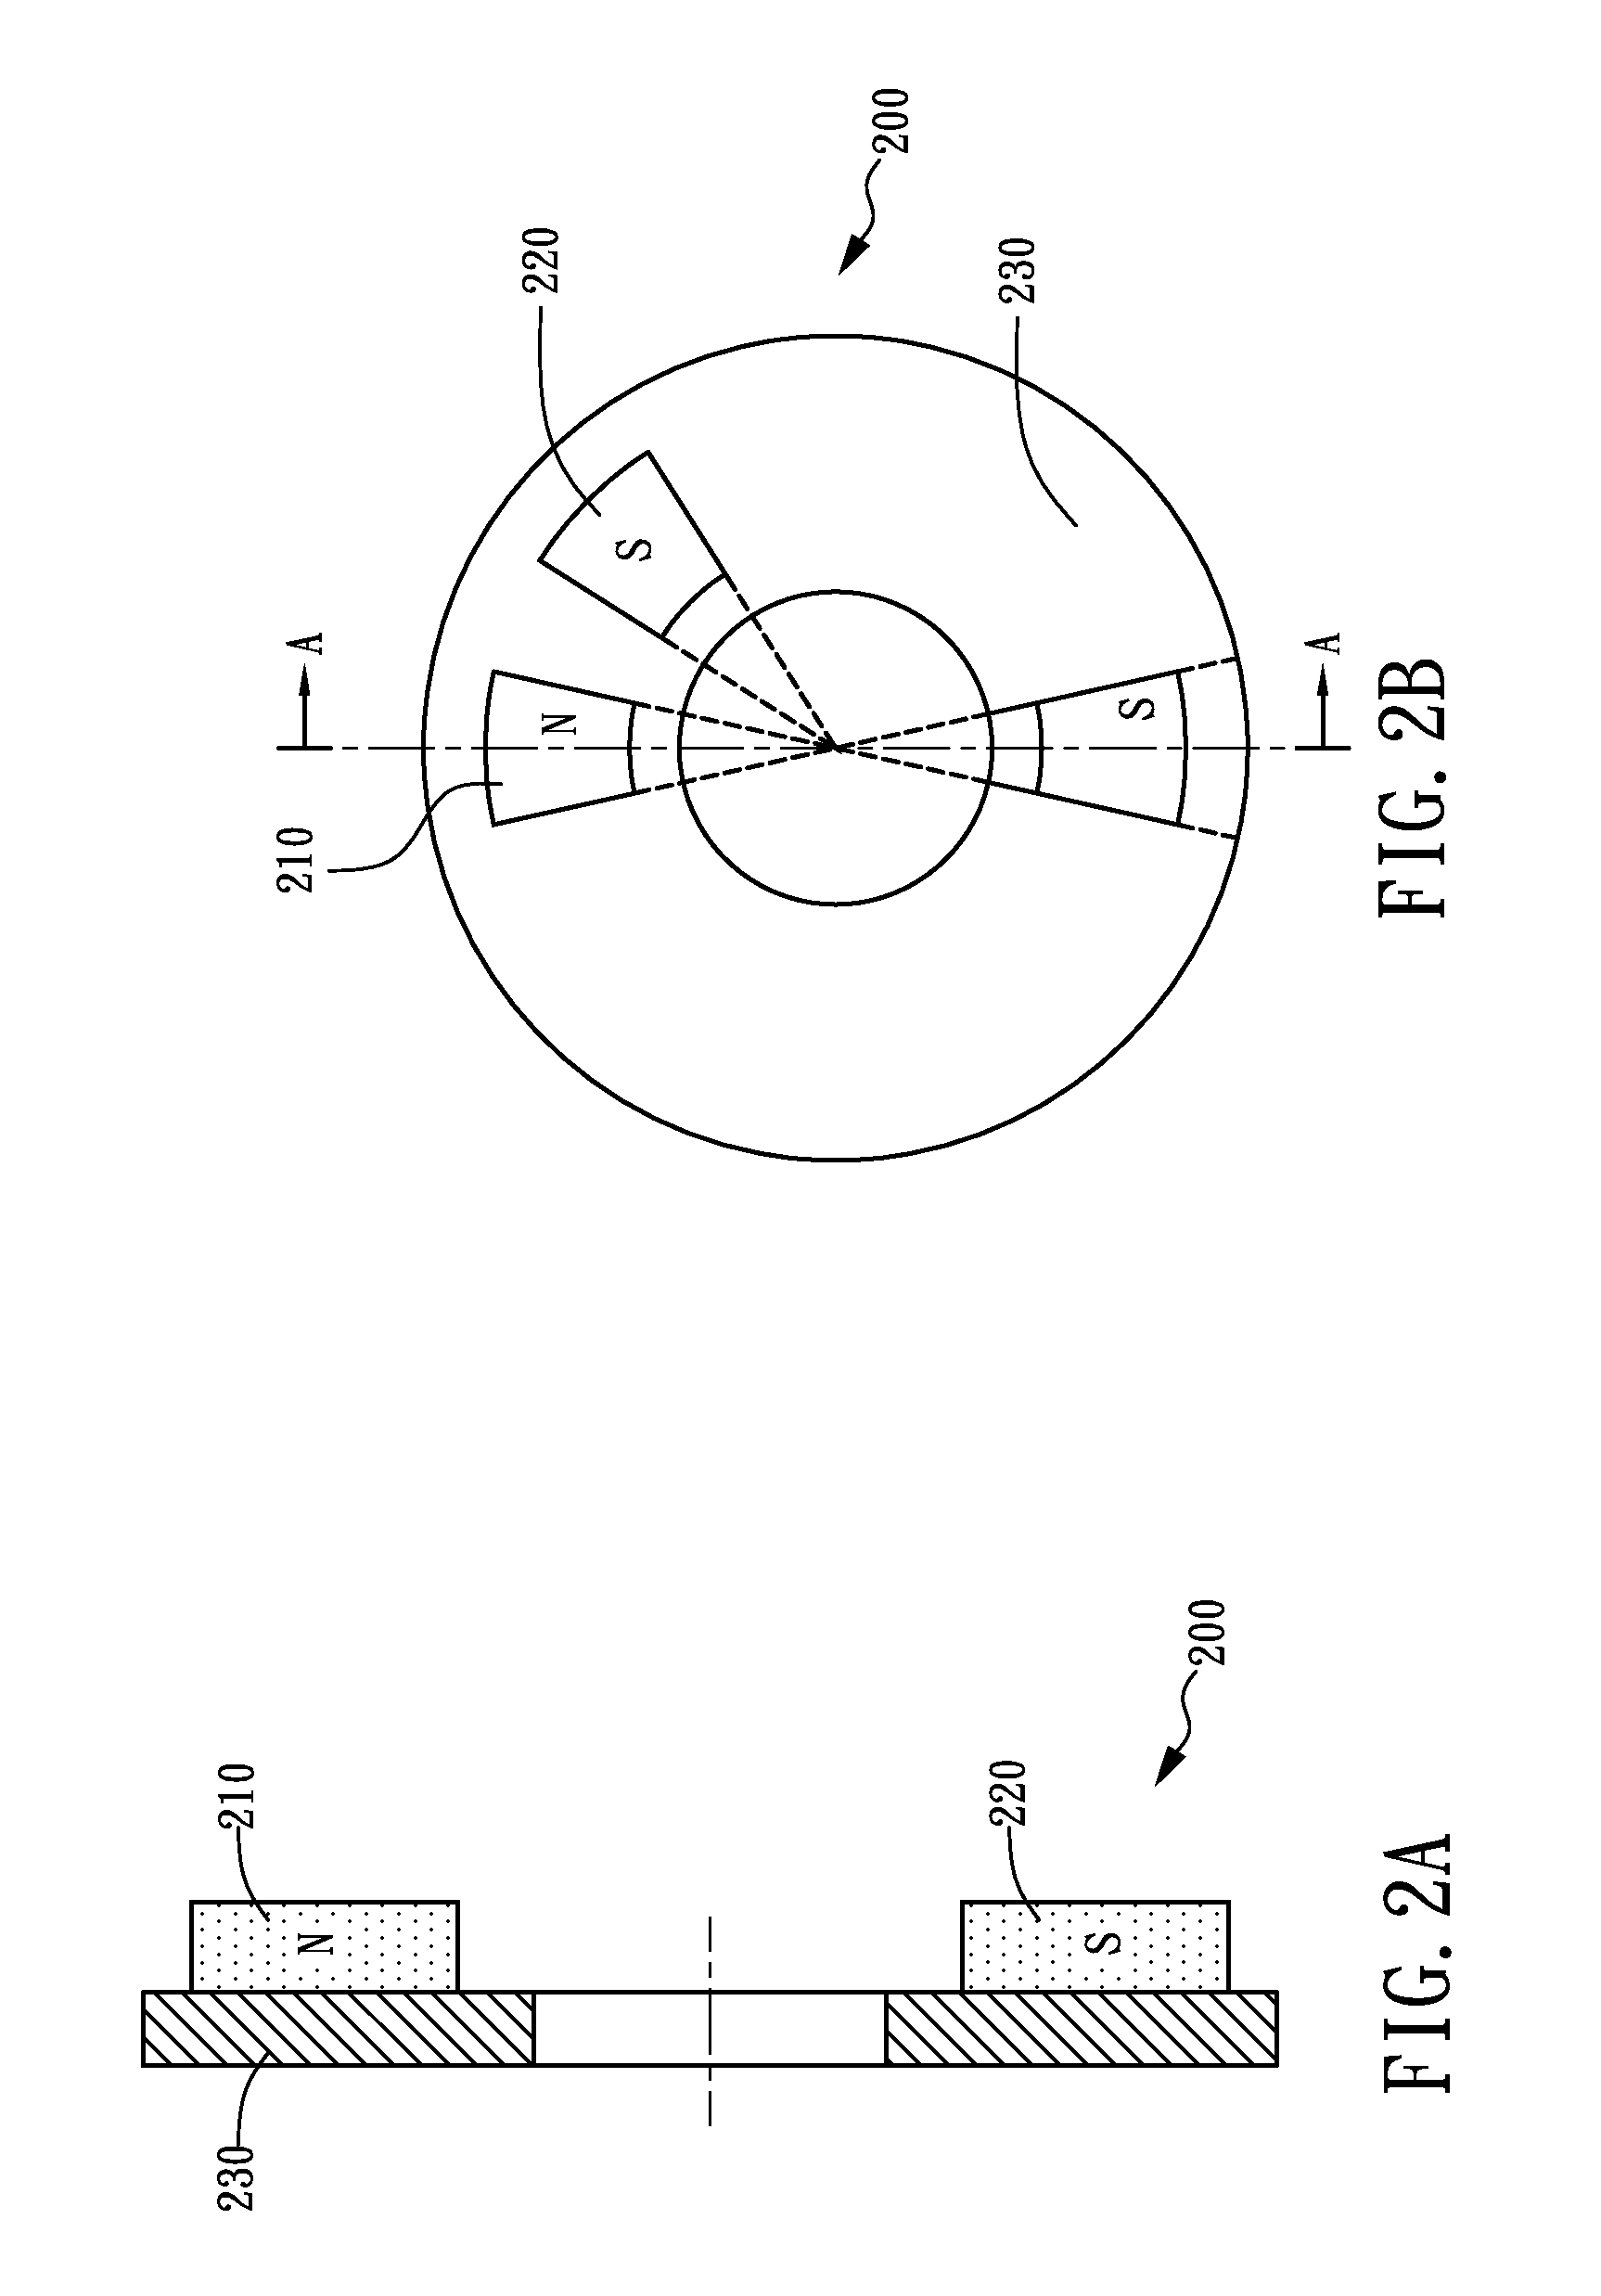 Axial-flux thin-plate motor